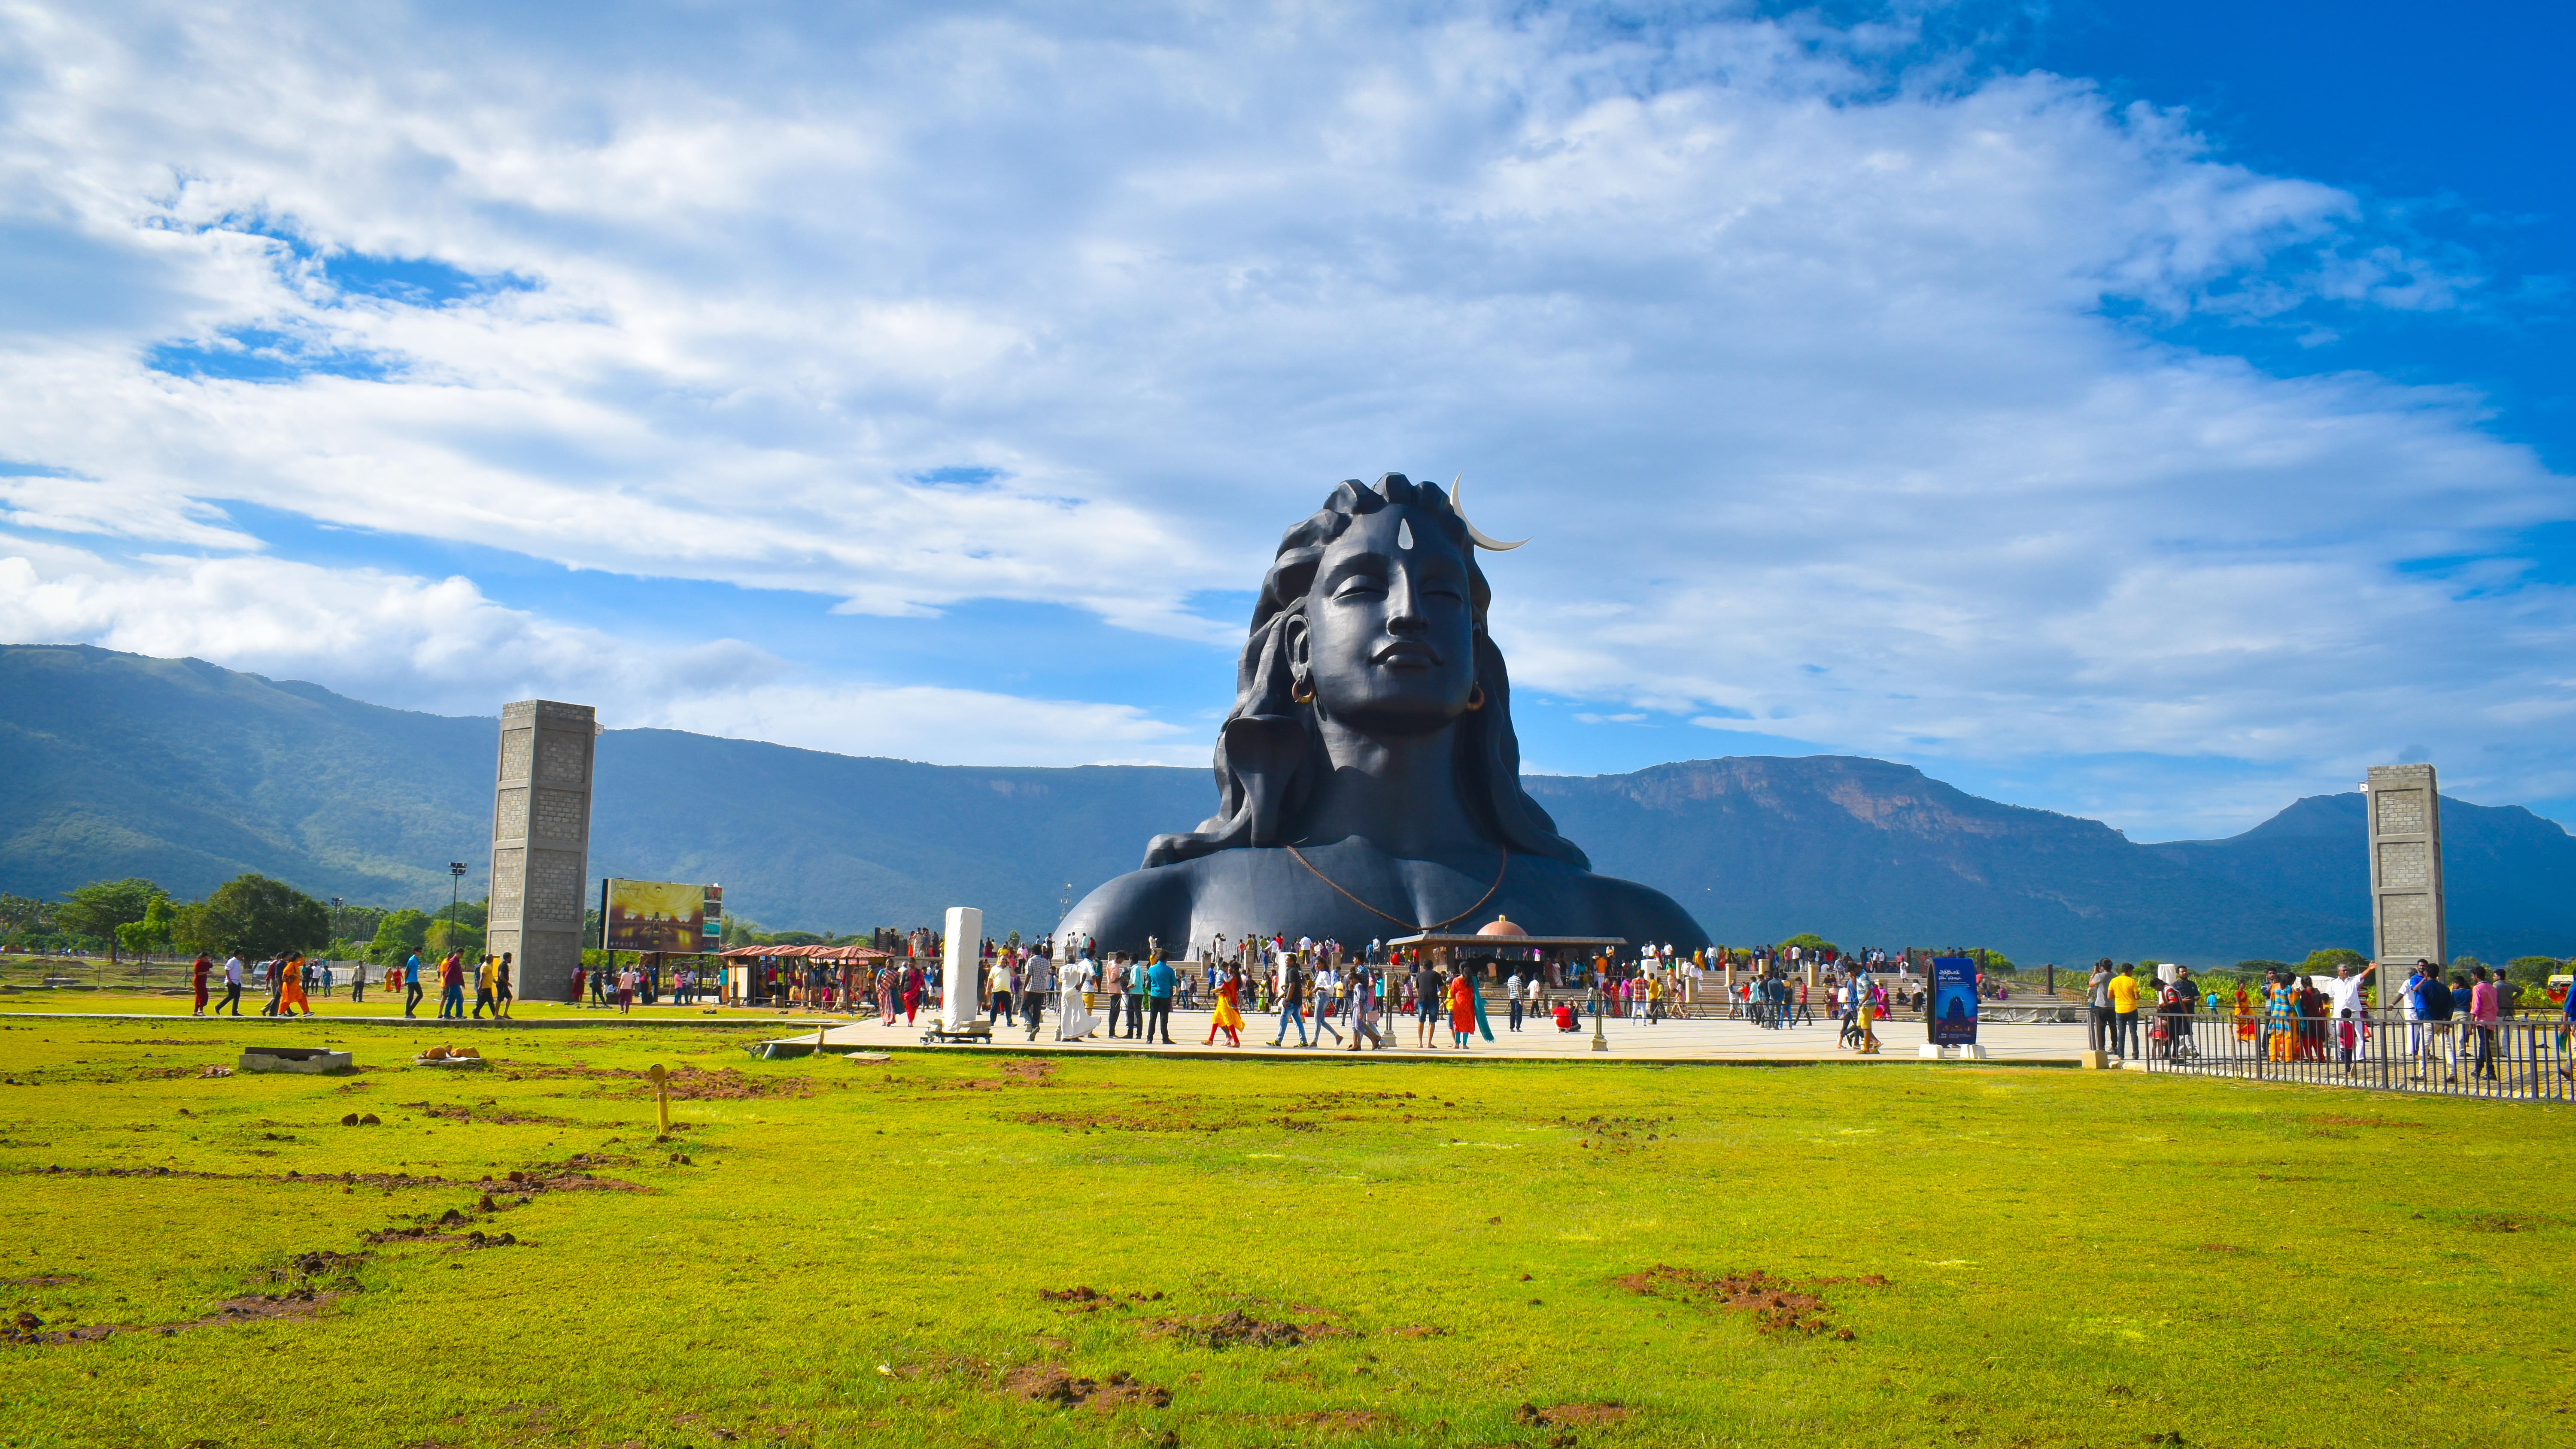 Tamil Nadu Packages from Hyderabad | Get Upto 40% Off